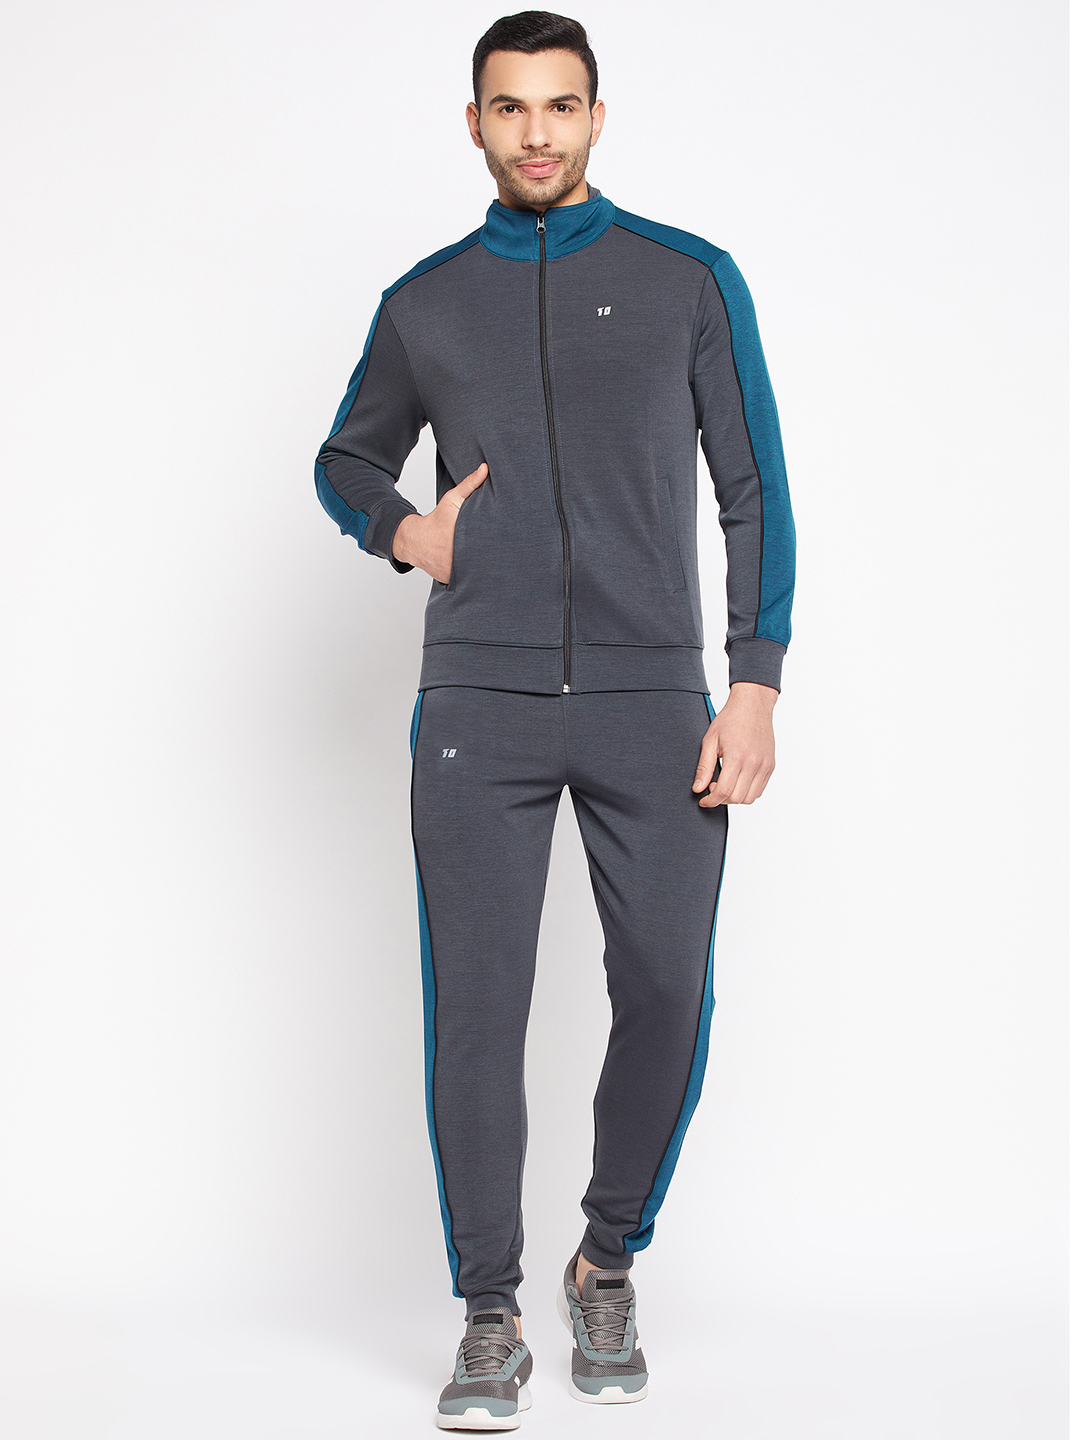 CB Charcoal Track Suit-Charcoal/Teal - T10 Sports